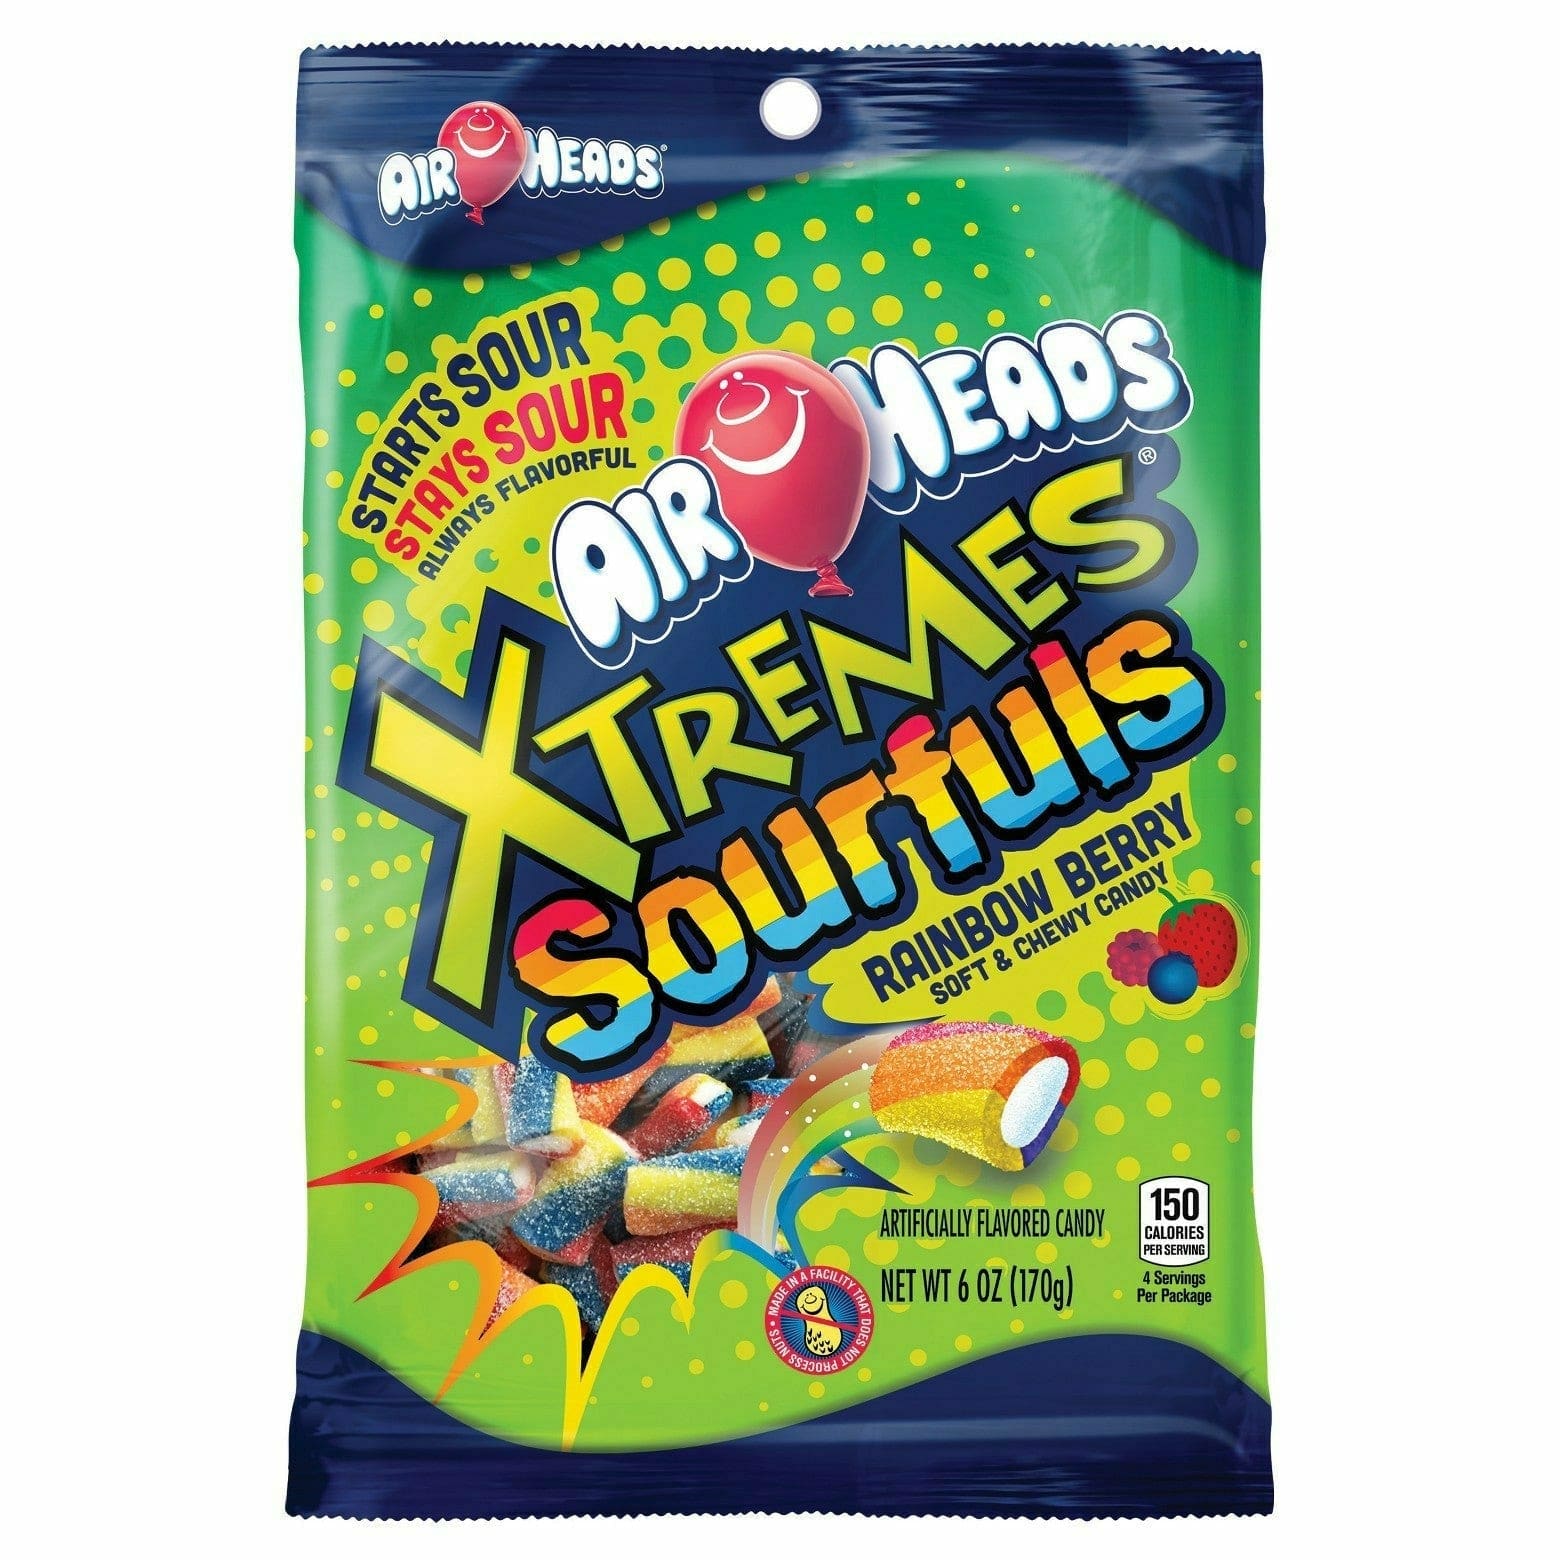 Redstone Foods Inc CANDY Airheads Xtremes Bites Sourfuls - Rainbow Berry